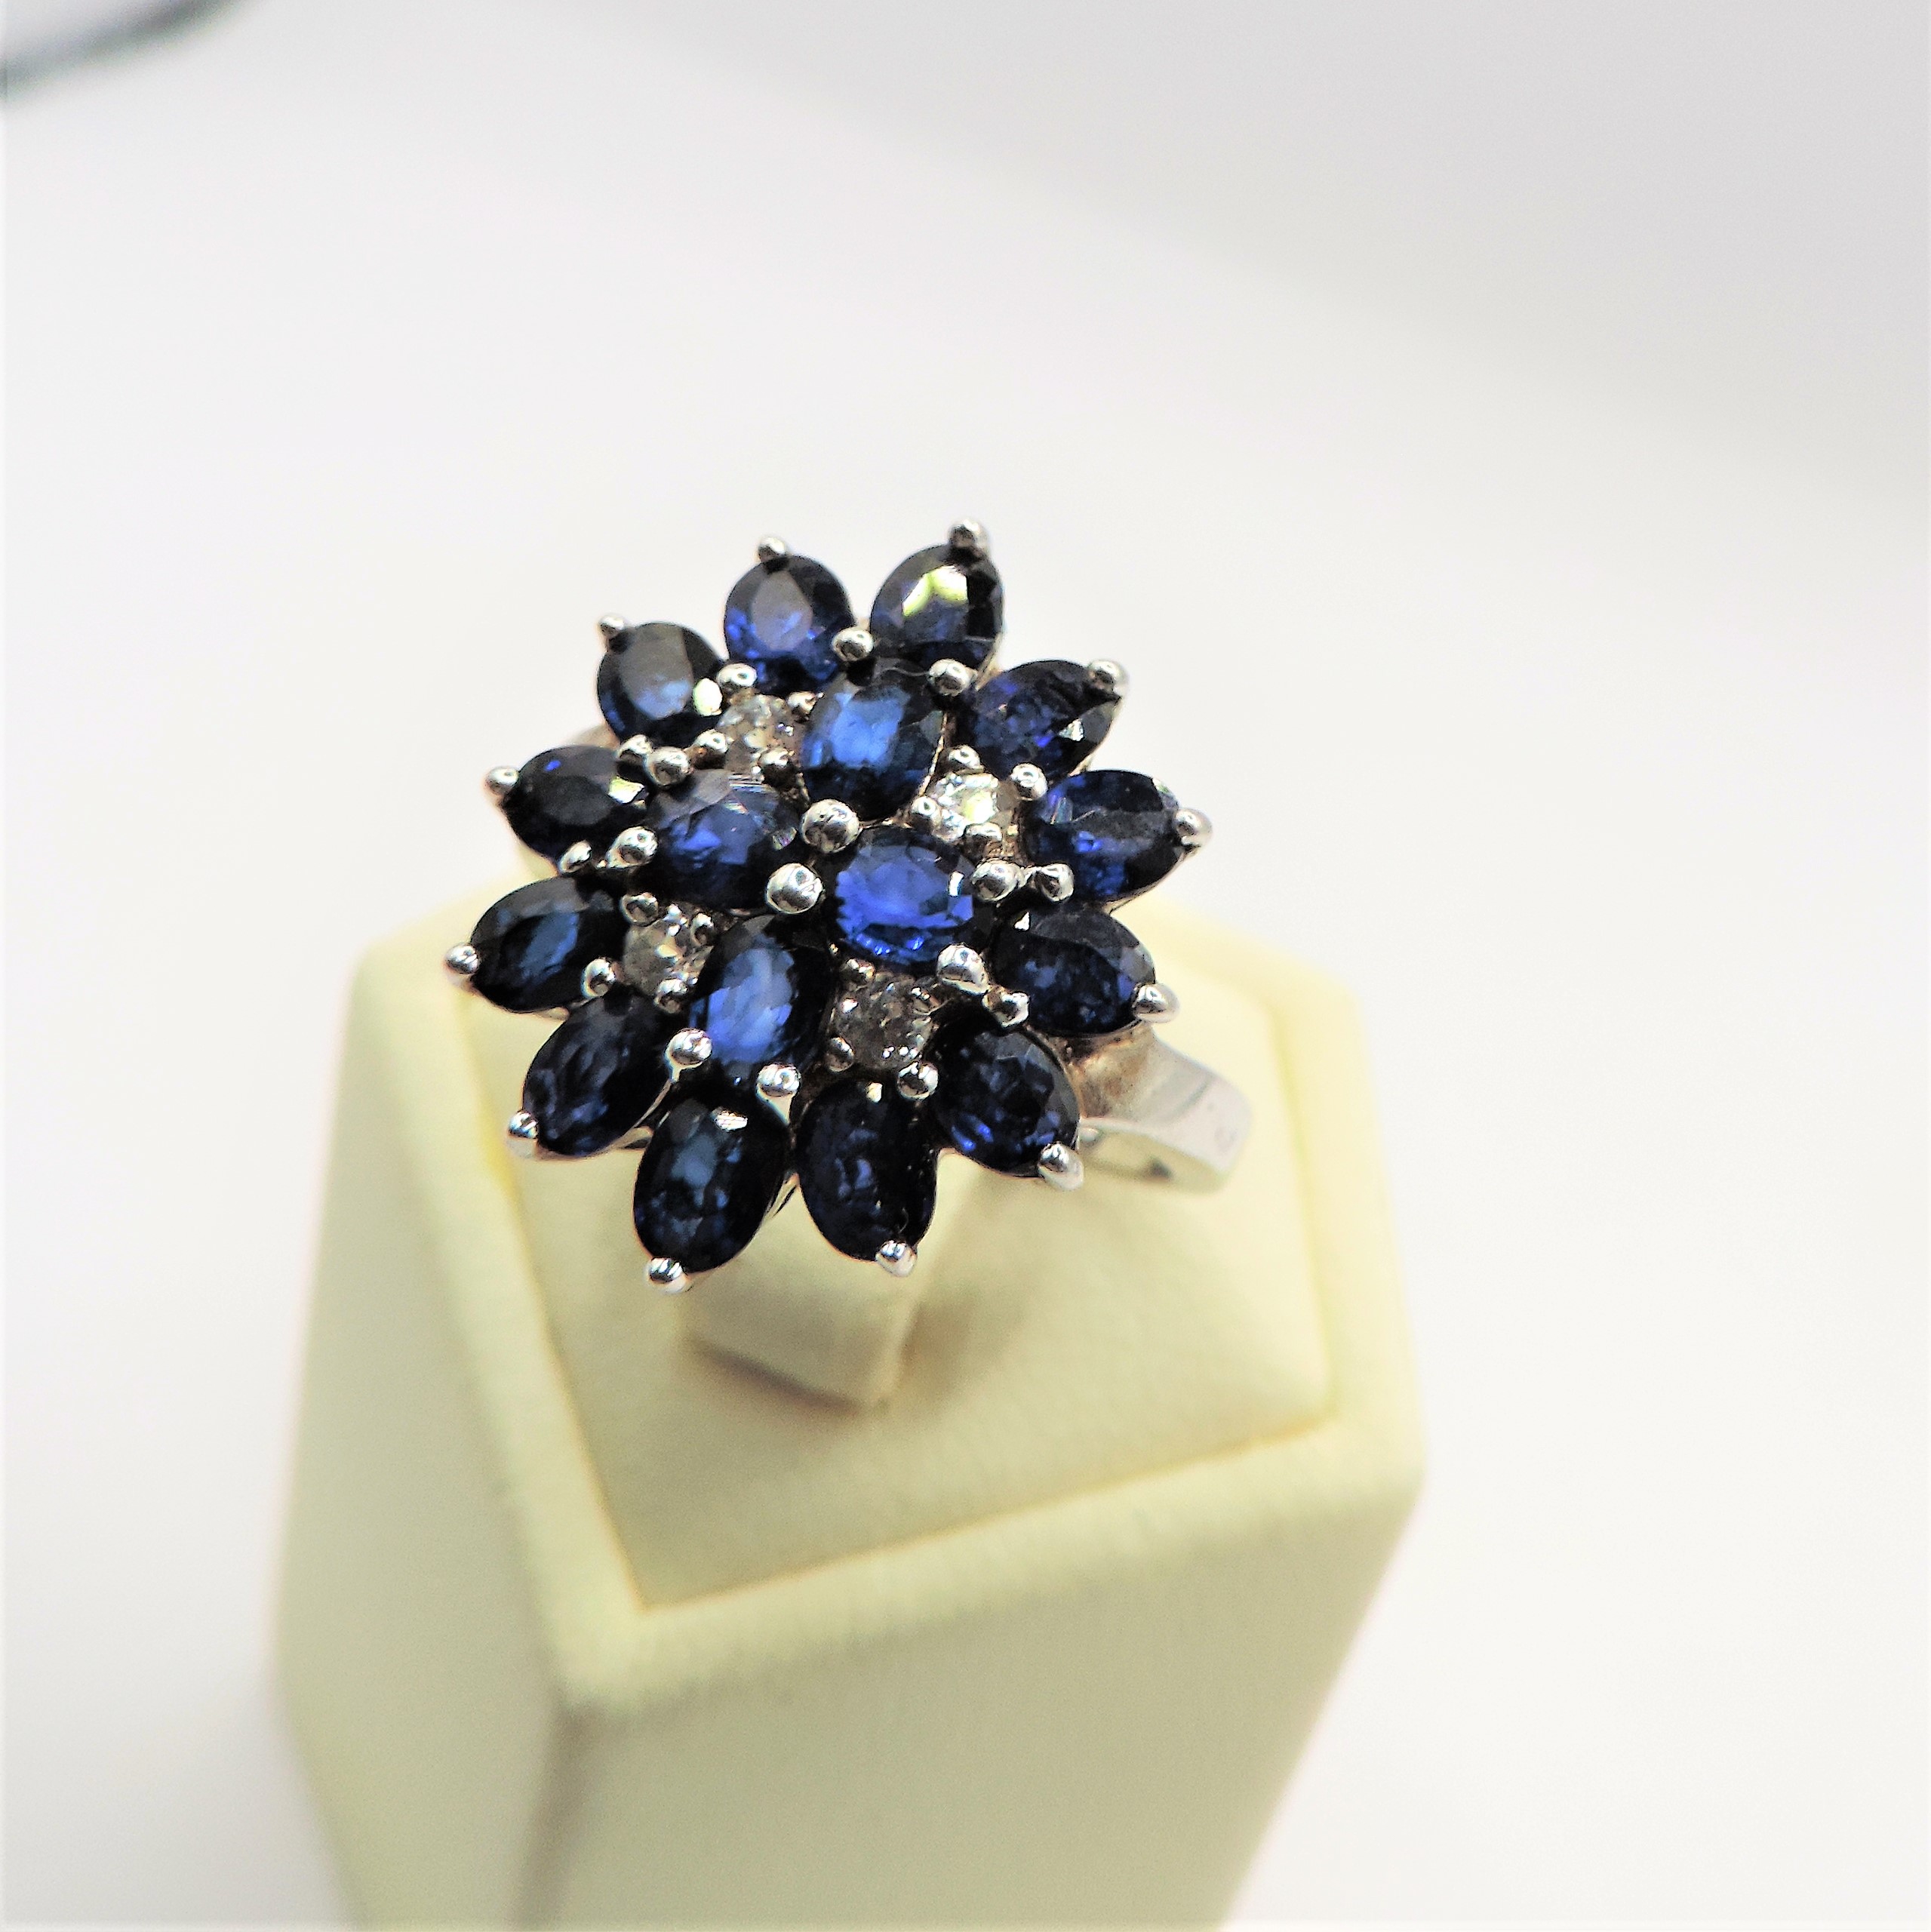 Sterling Silver 20 Sapphire Gemstone Cluster Ring New with Gift Box - Image 2 of 4